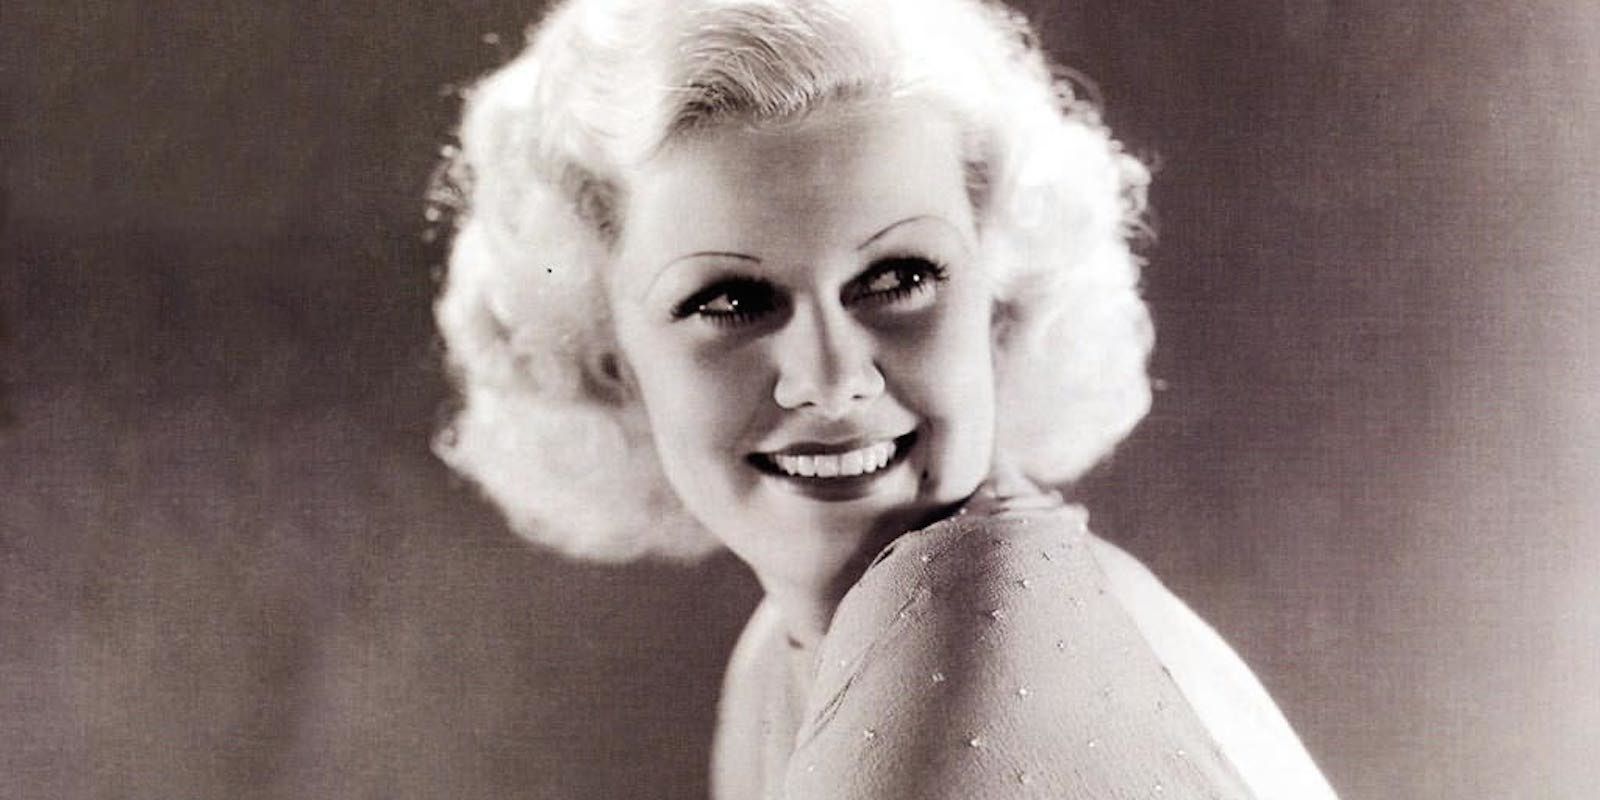 jean harlow movie stars died tragically young